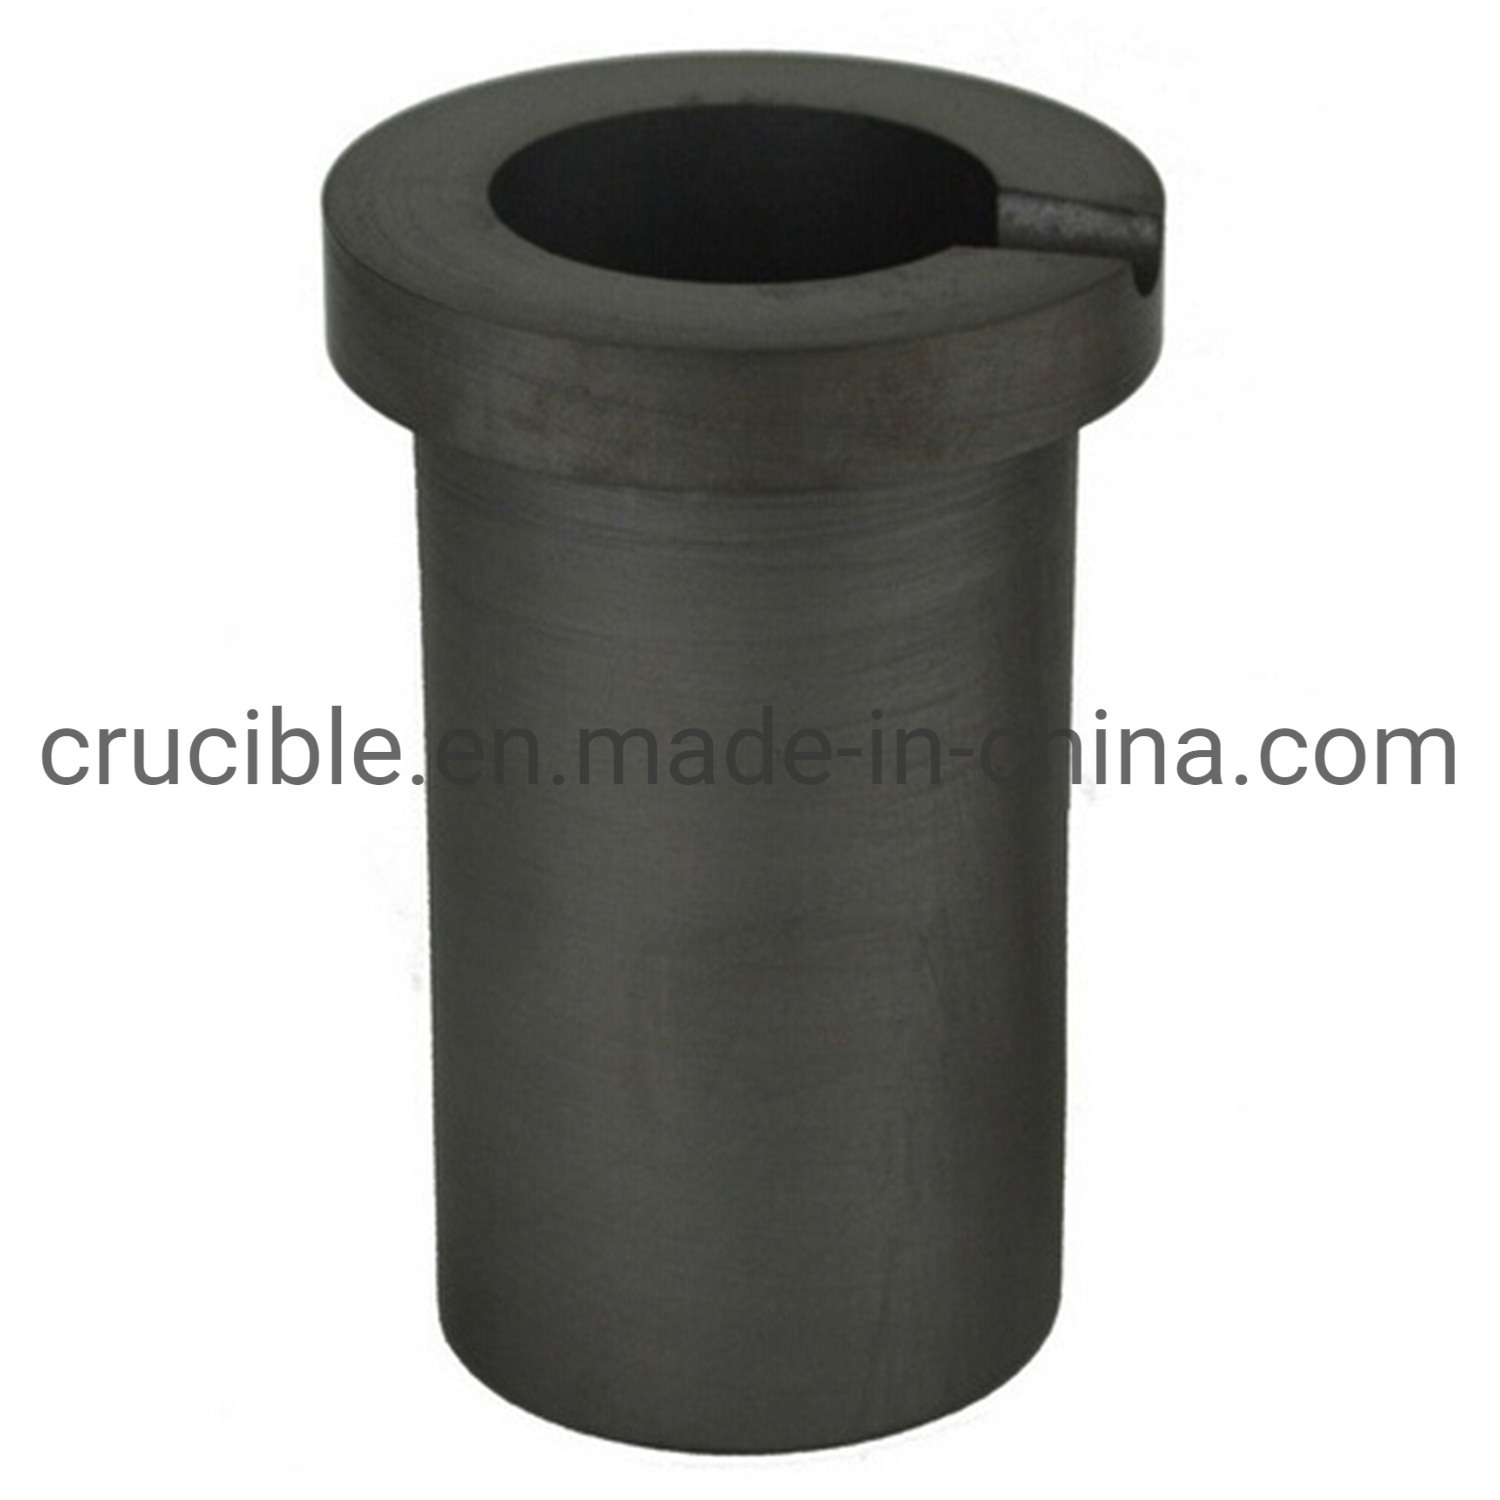 High purity Graphite Melting Crucible for Precious Metal